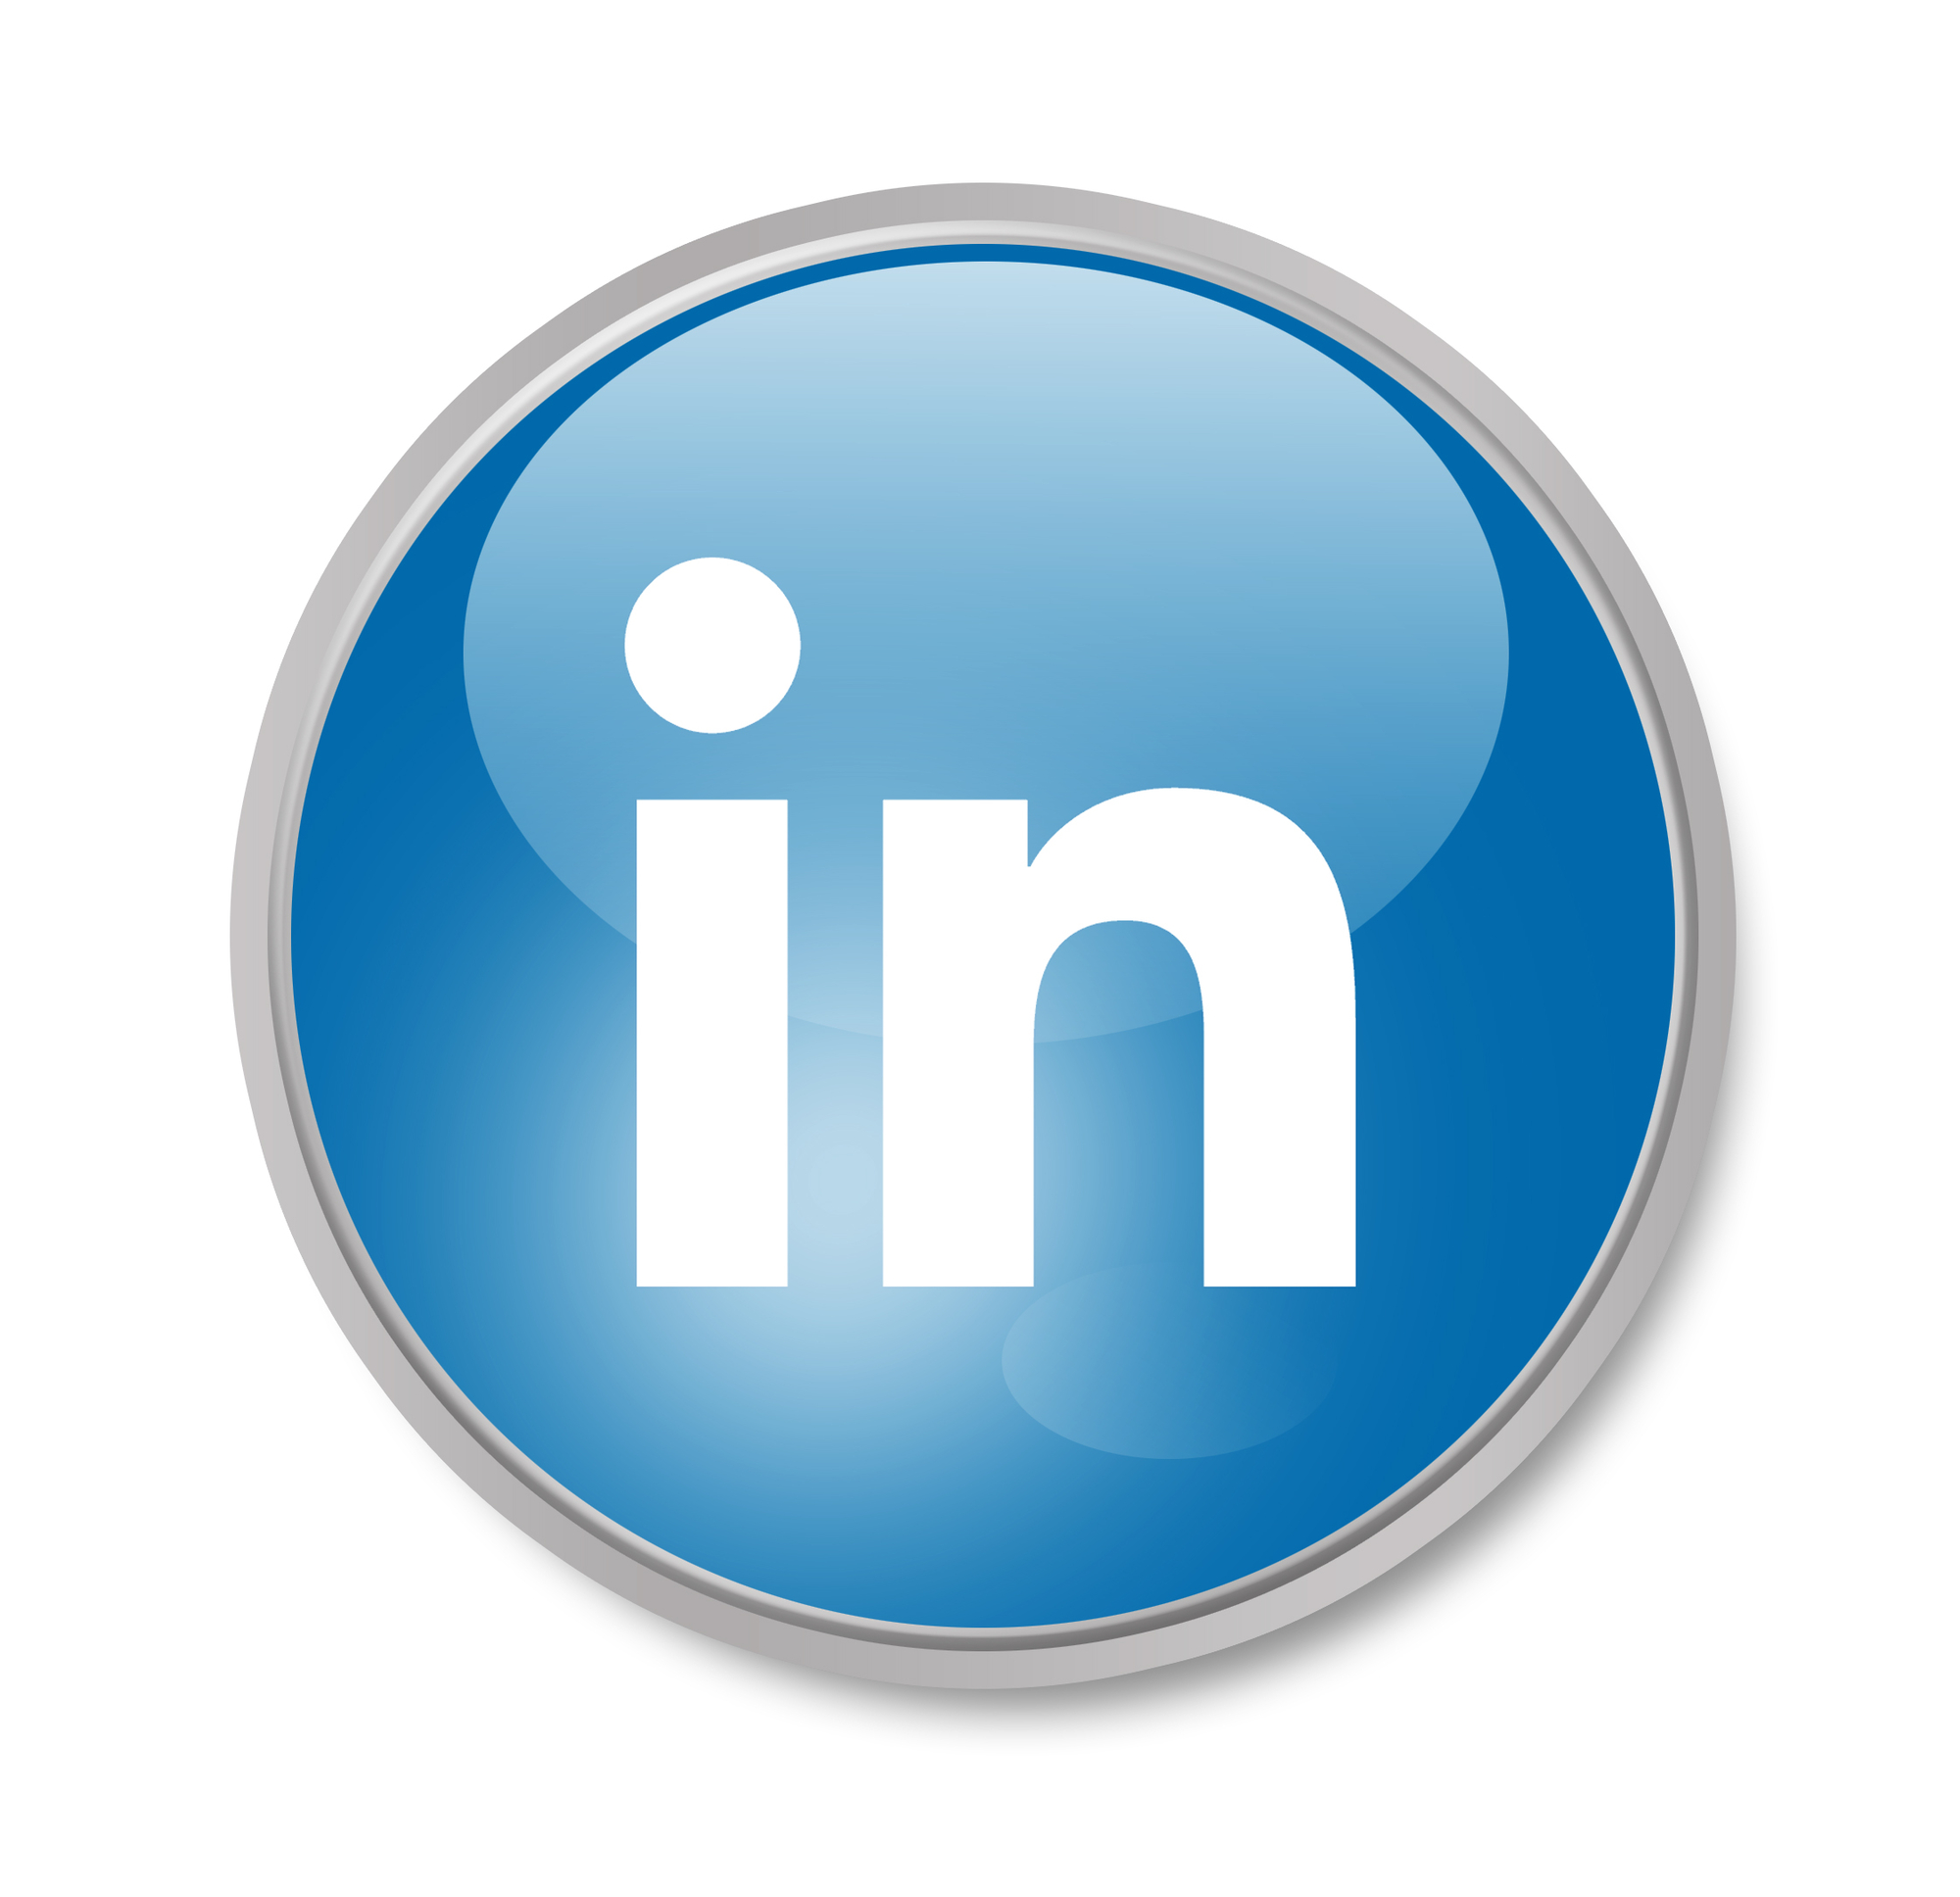 T2 – Why do we focus so much on LinkedIn?